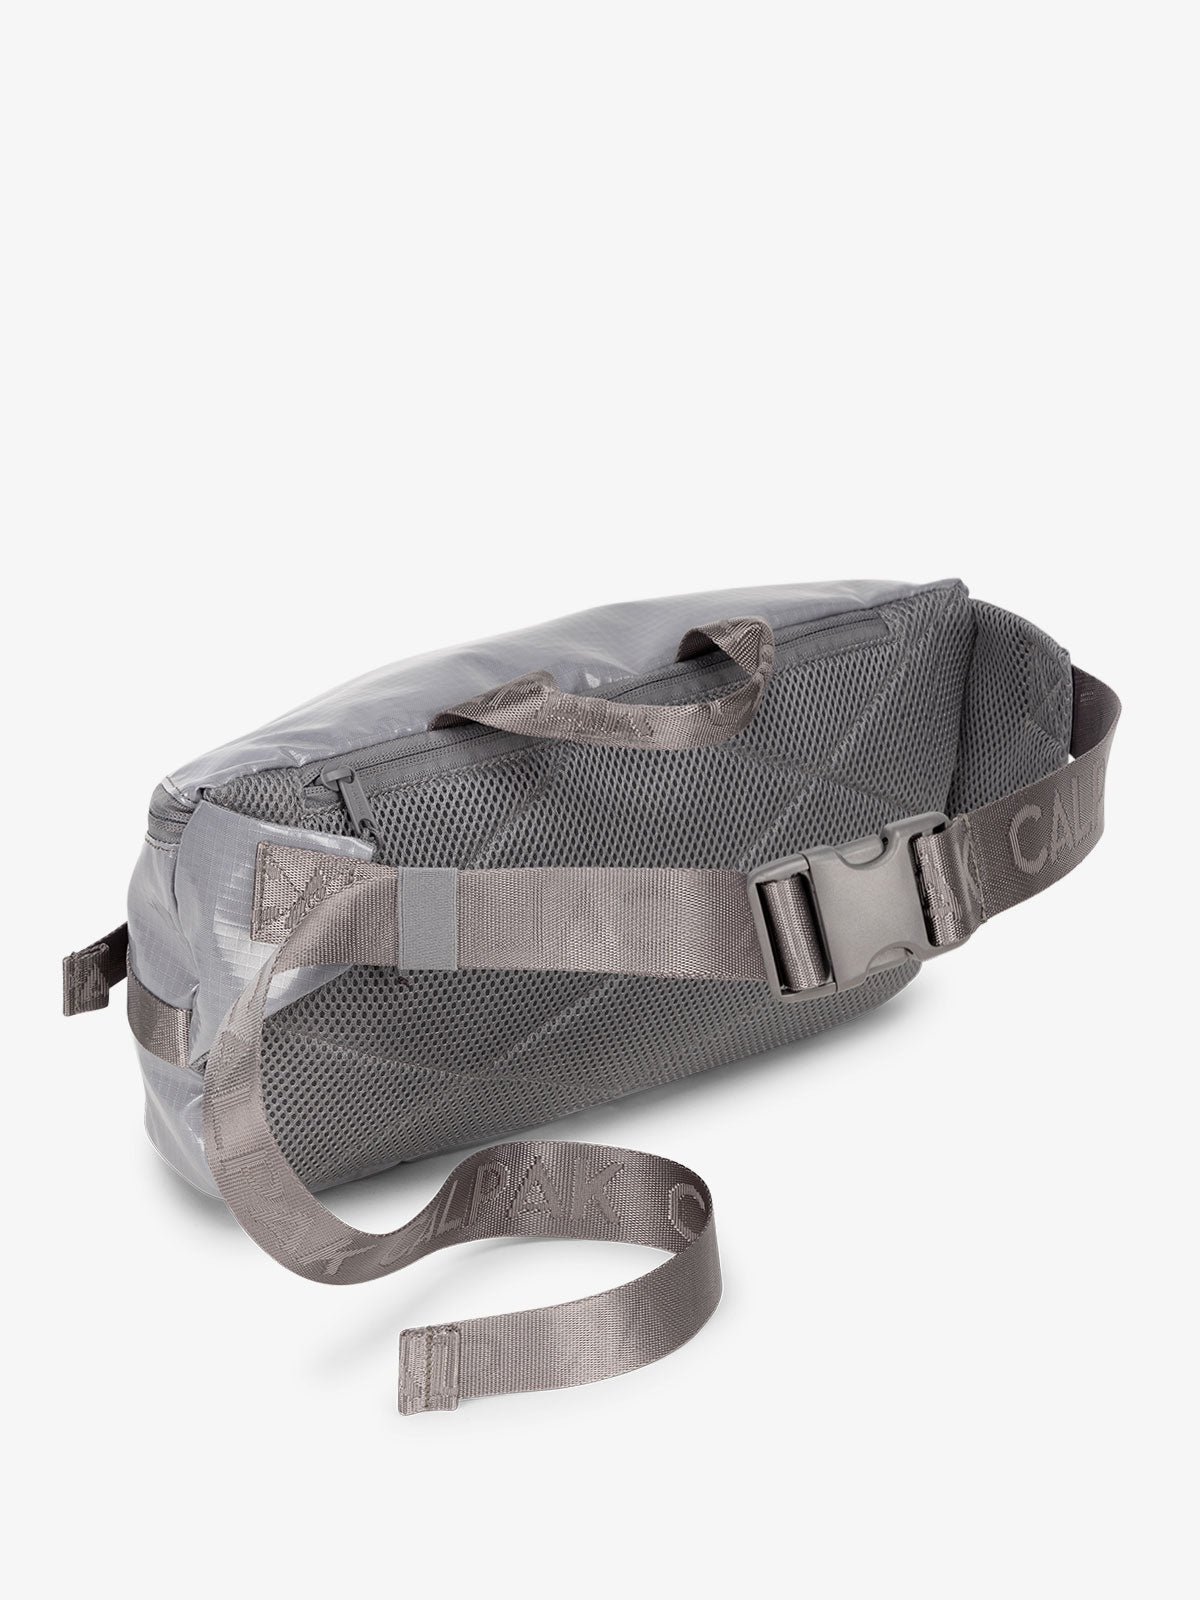 CALPAK Terra Sling Bag for women with adjustable crossbody strap and top handle in storm gray